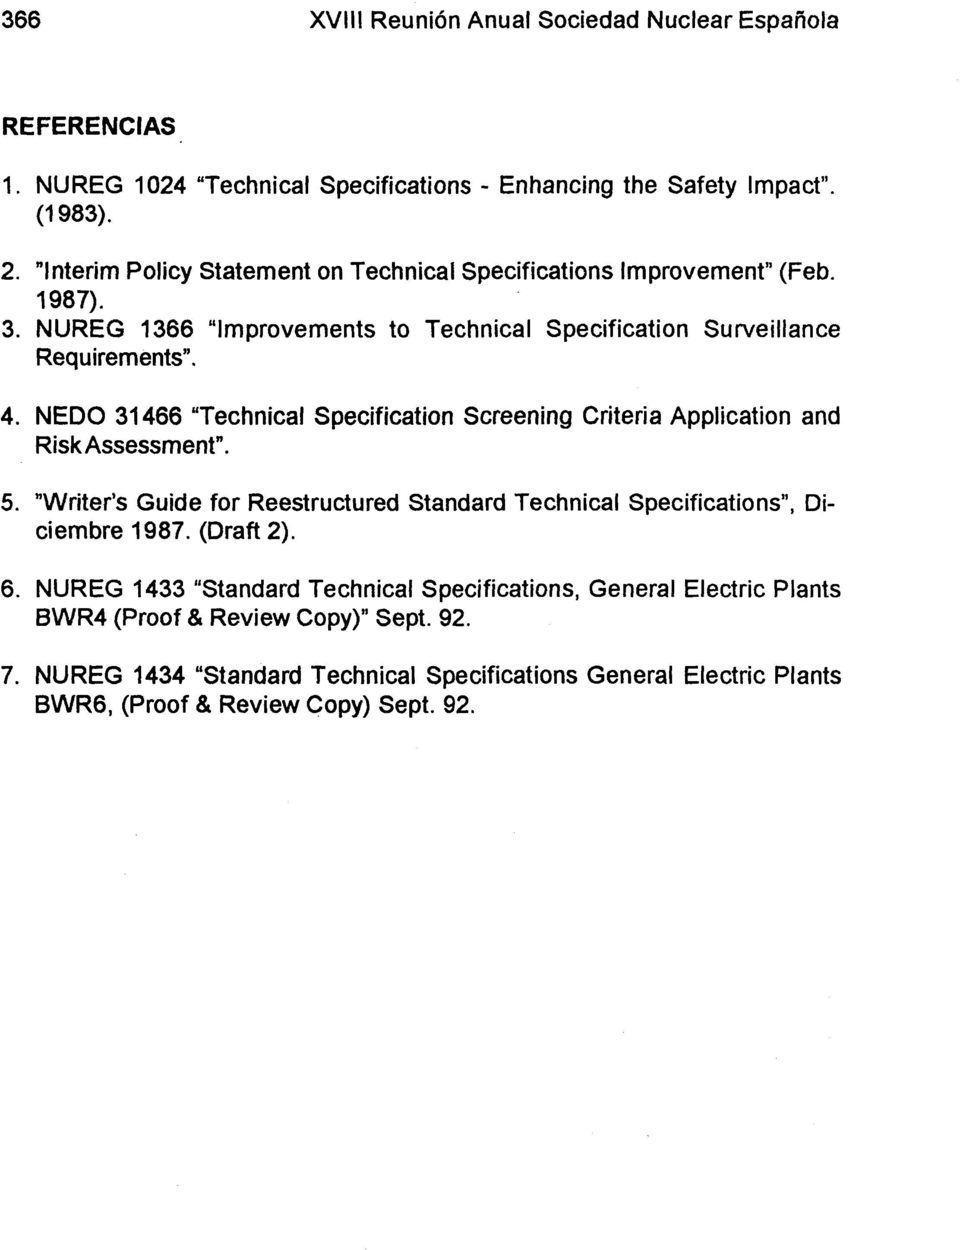 NEDO 31466 "Technical Specification Screening Criteria Application and Risk Assessment". 5. "Writer's Guide for Reestructured Standard Technical Specifications", Diciembre 1987.